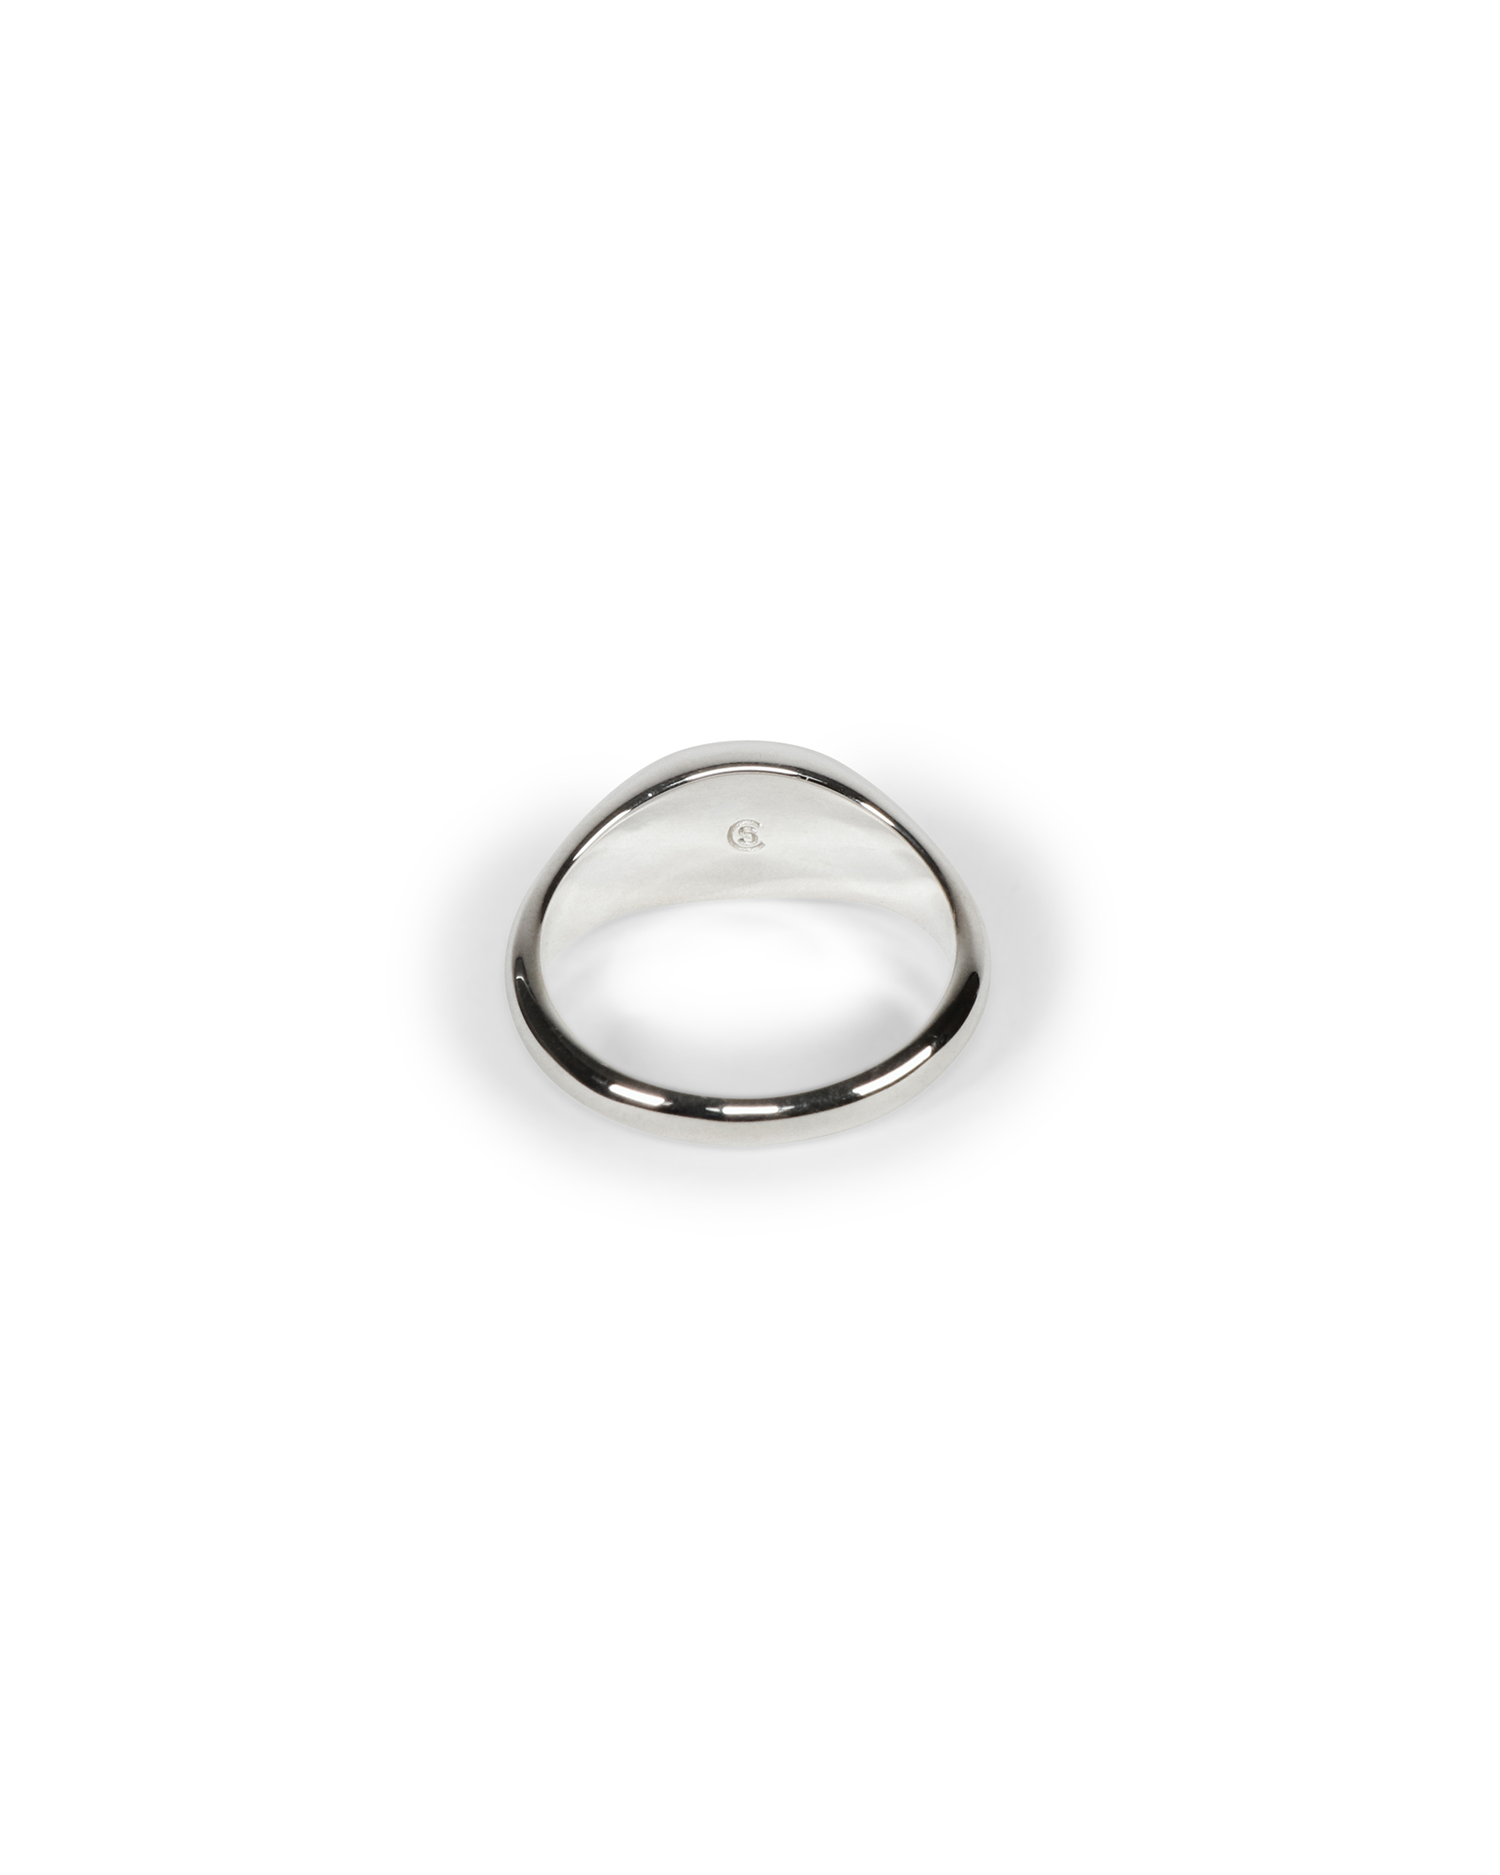 TYPE 001 Classic Signet Ring - 925 Sterling Silver